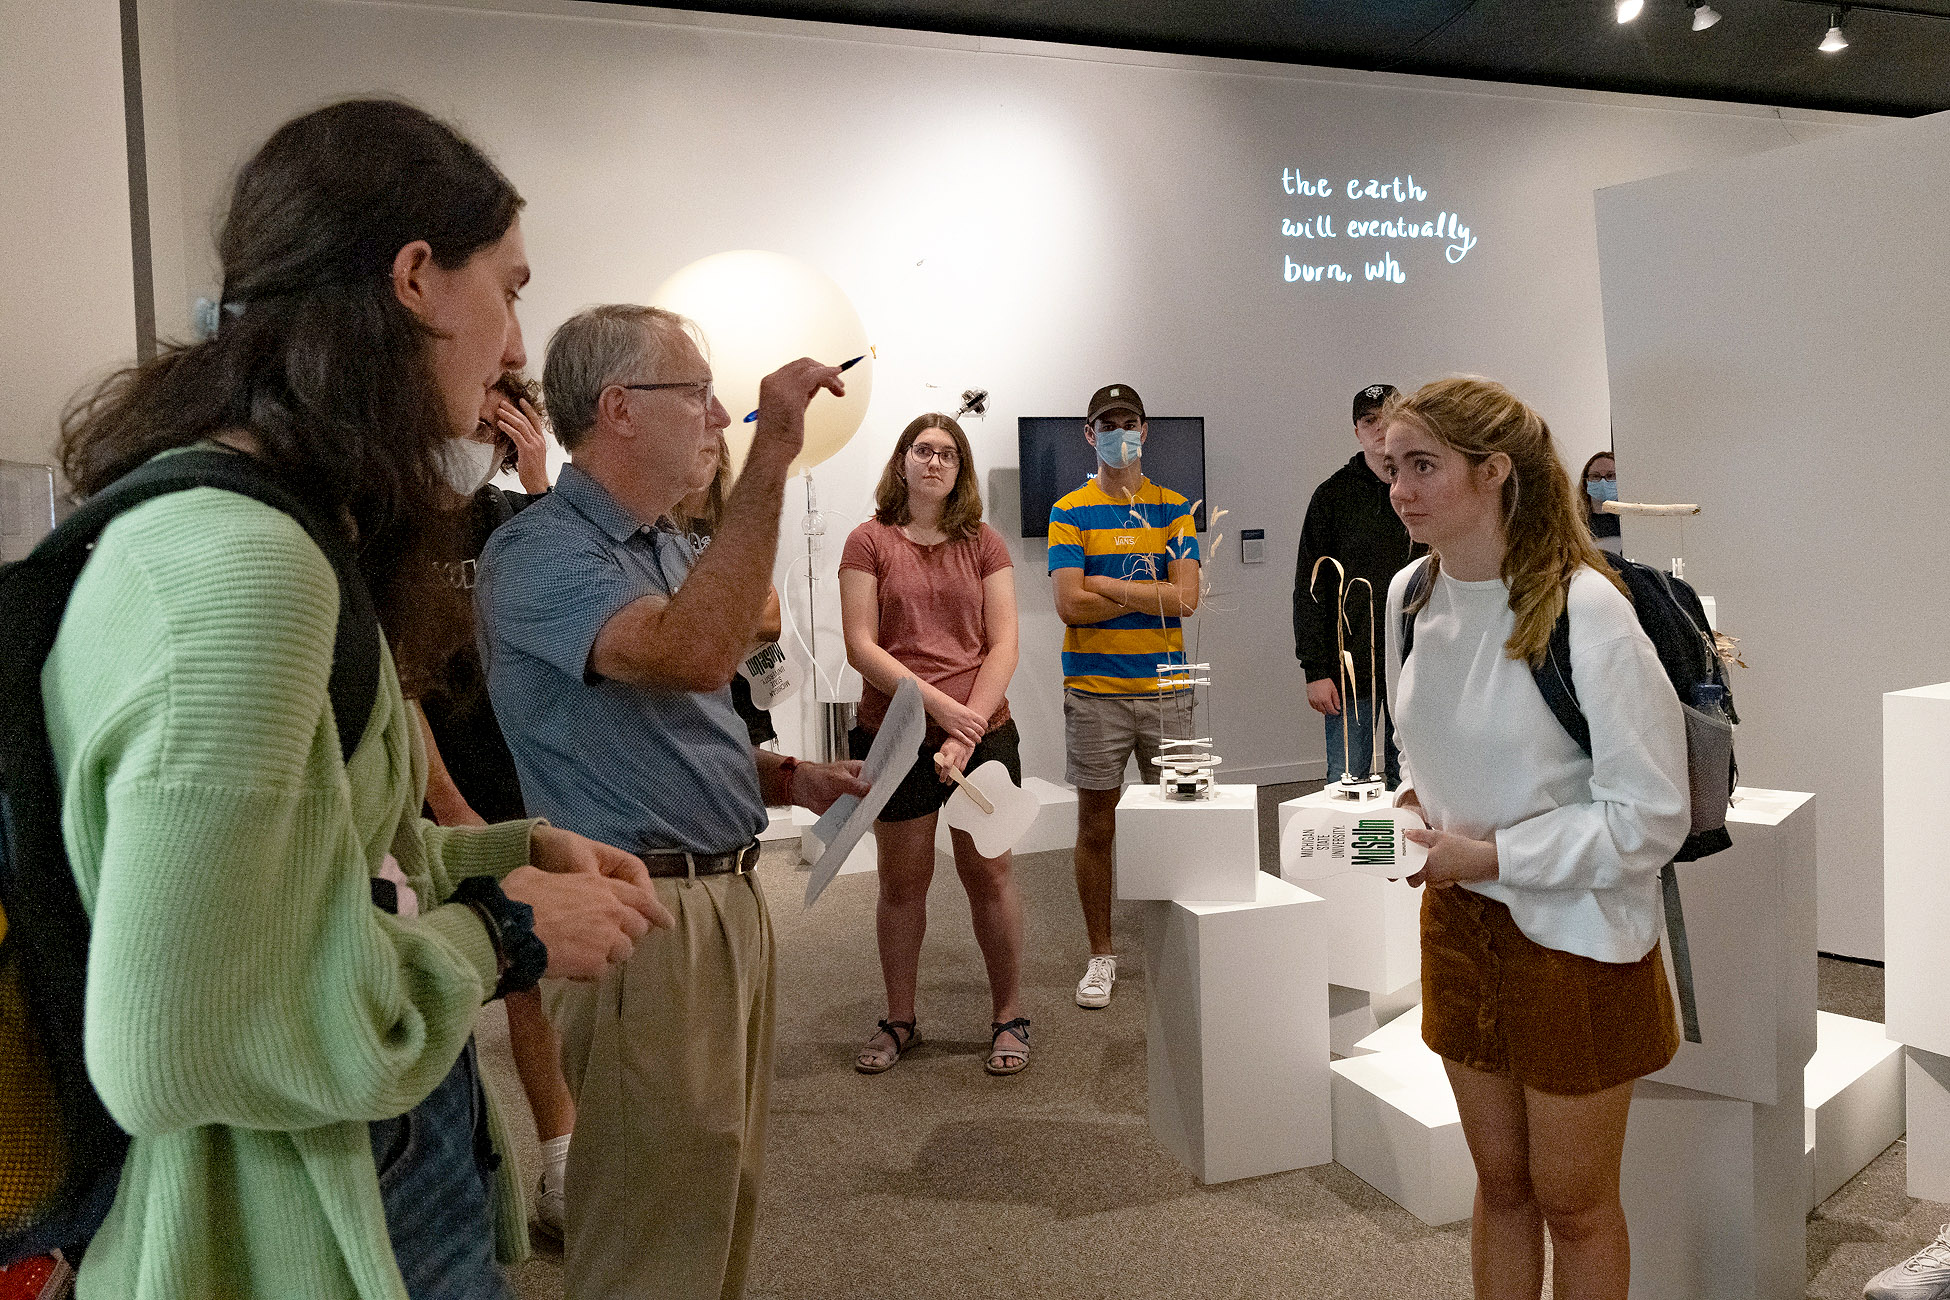 Image of people standing and gathered in the Museum, listening to an instructor.